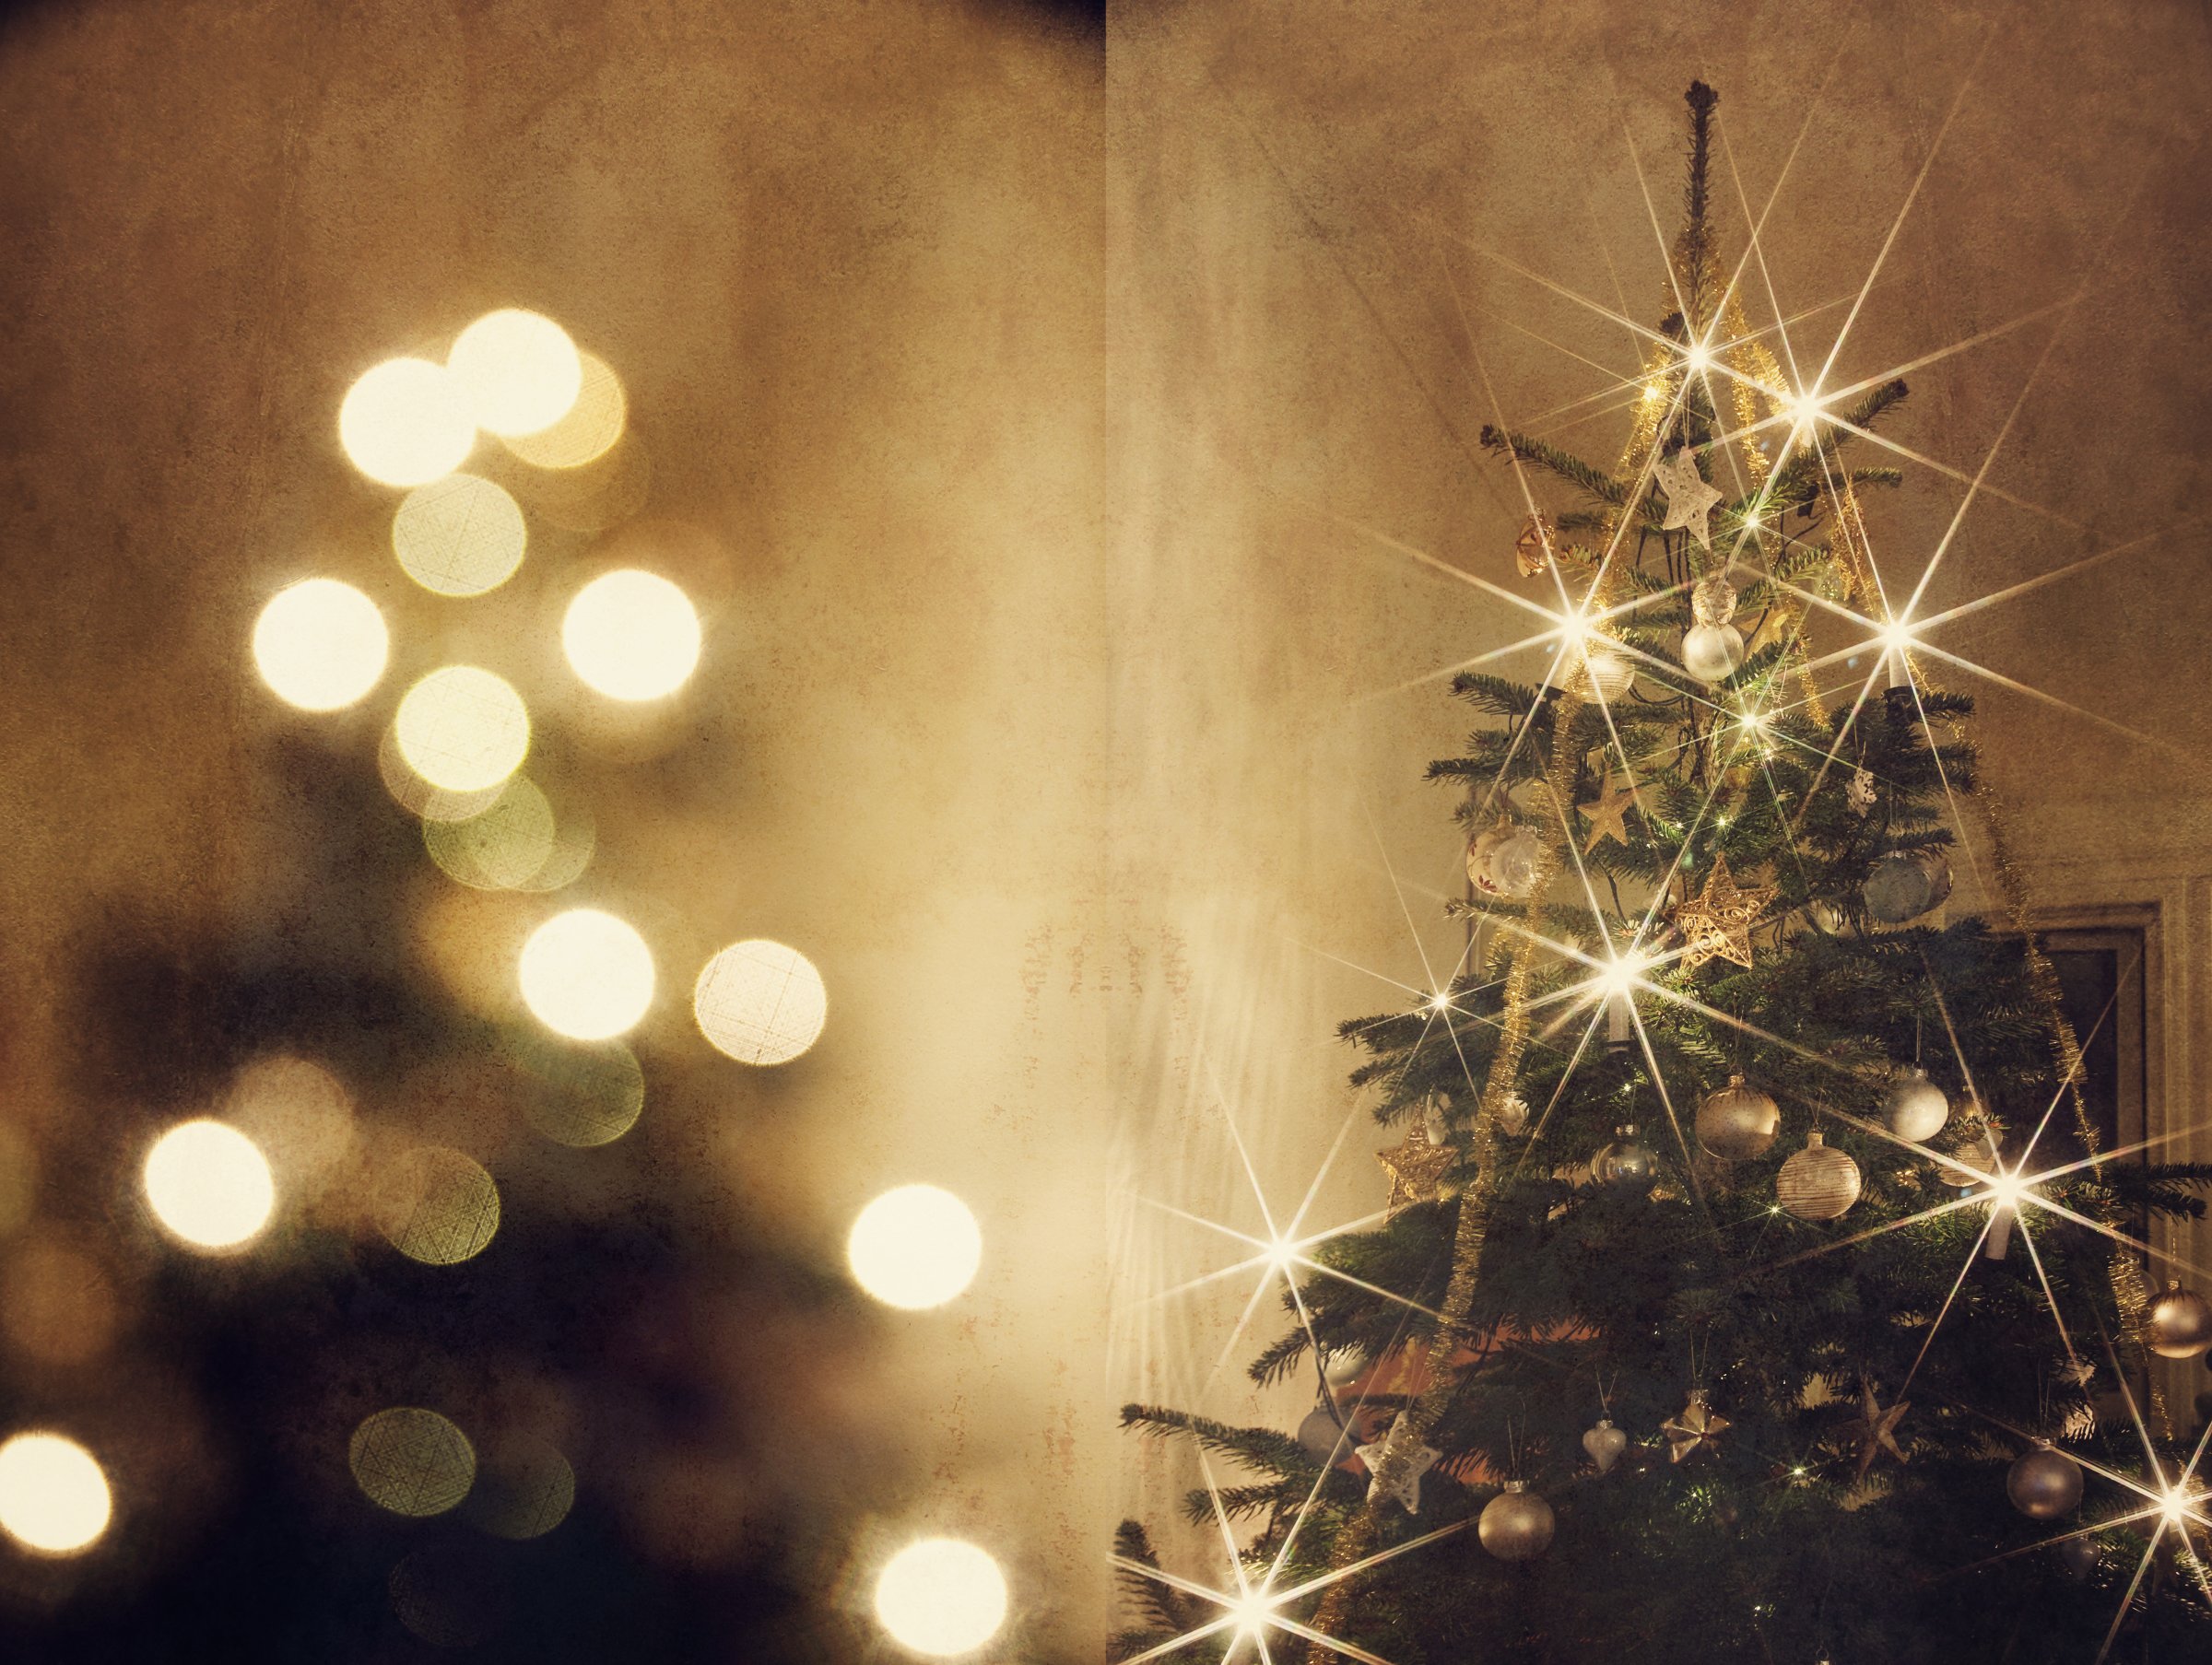 The first Christmas tree with electric lights was lit in 1882.